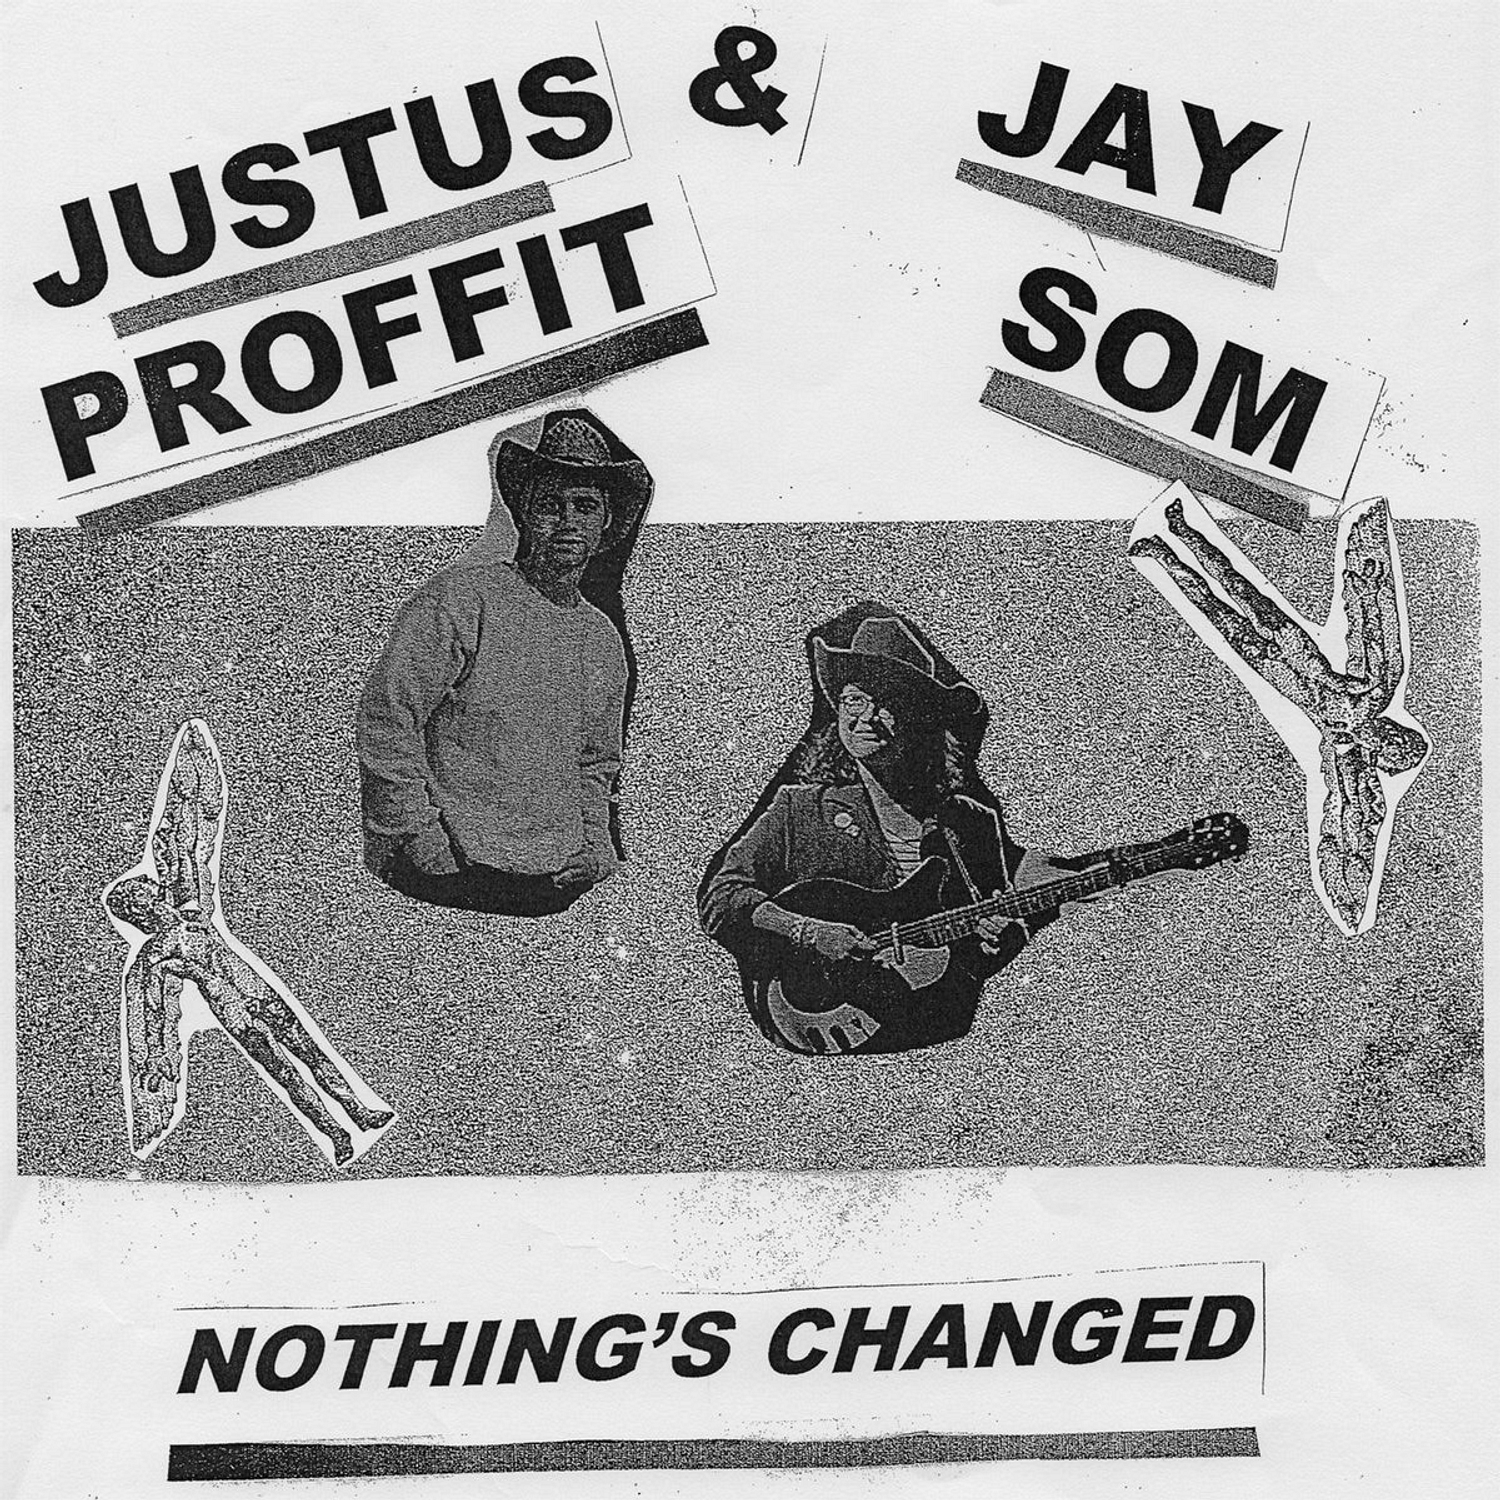 Jay Som teams up with Justus Proffit for ‘Nothing’s Changed’ EP